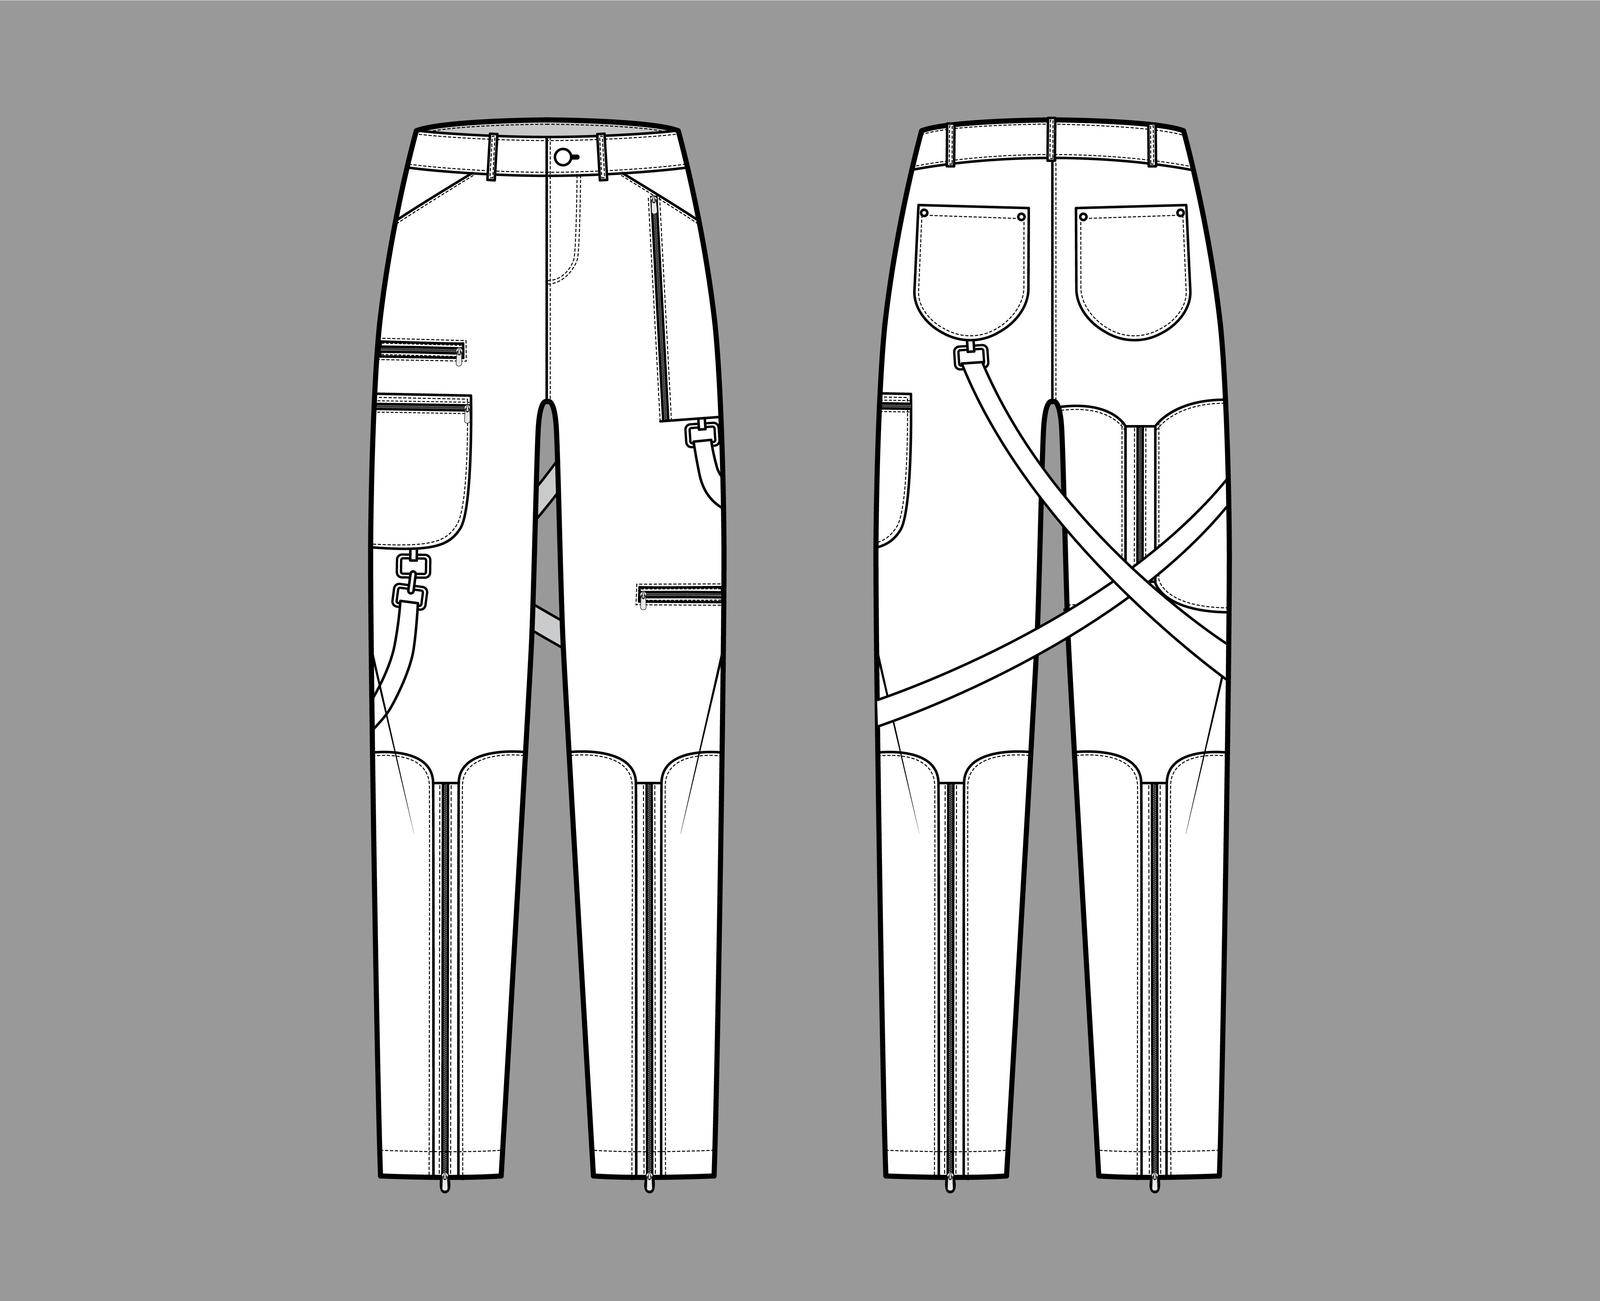 Bondage pants technical fashion illustration with low waist, rise, pockets, belt loops, full lengths Flat bottom apparel by Vectoressa